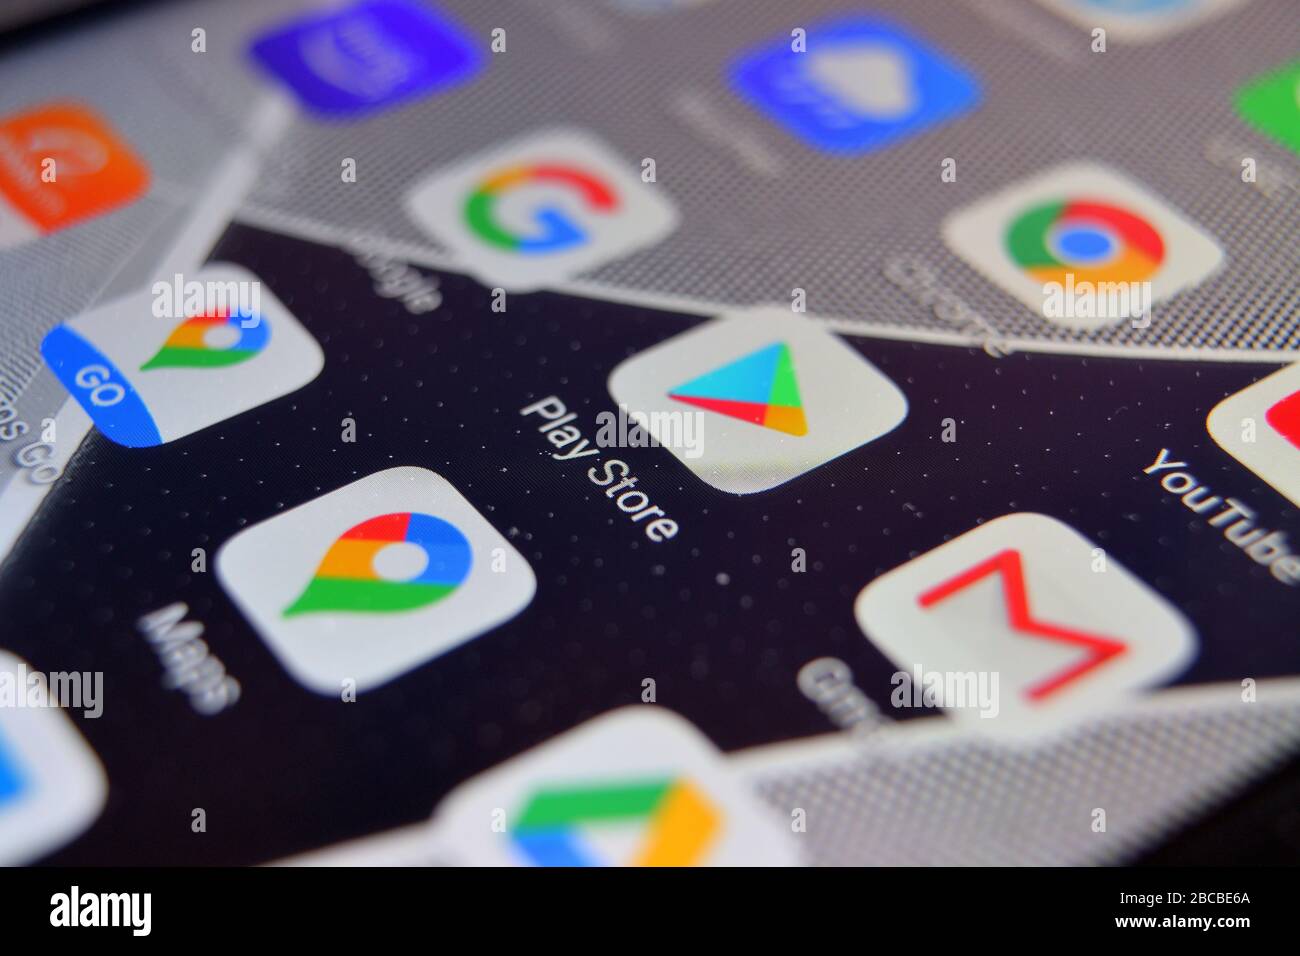 Valverde (CT), Italy - April 02, 2020: Close-up view of Google Play Store app on an Android smartphone, including other icons. Stock Photo